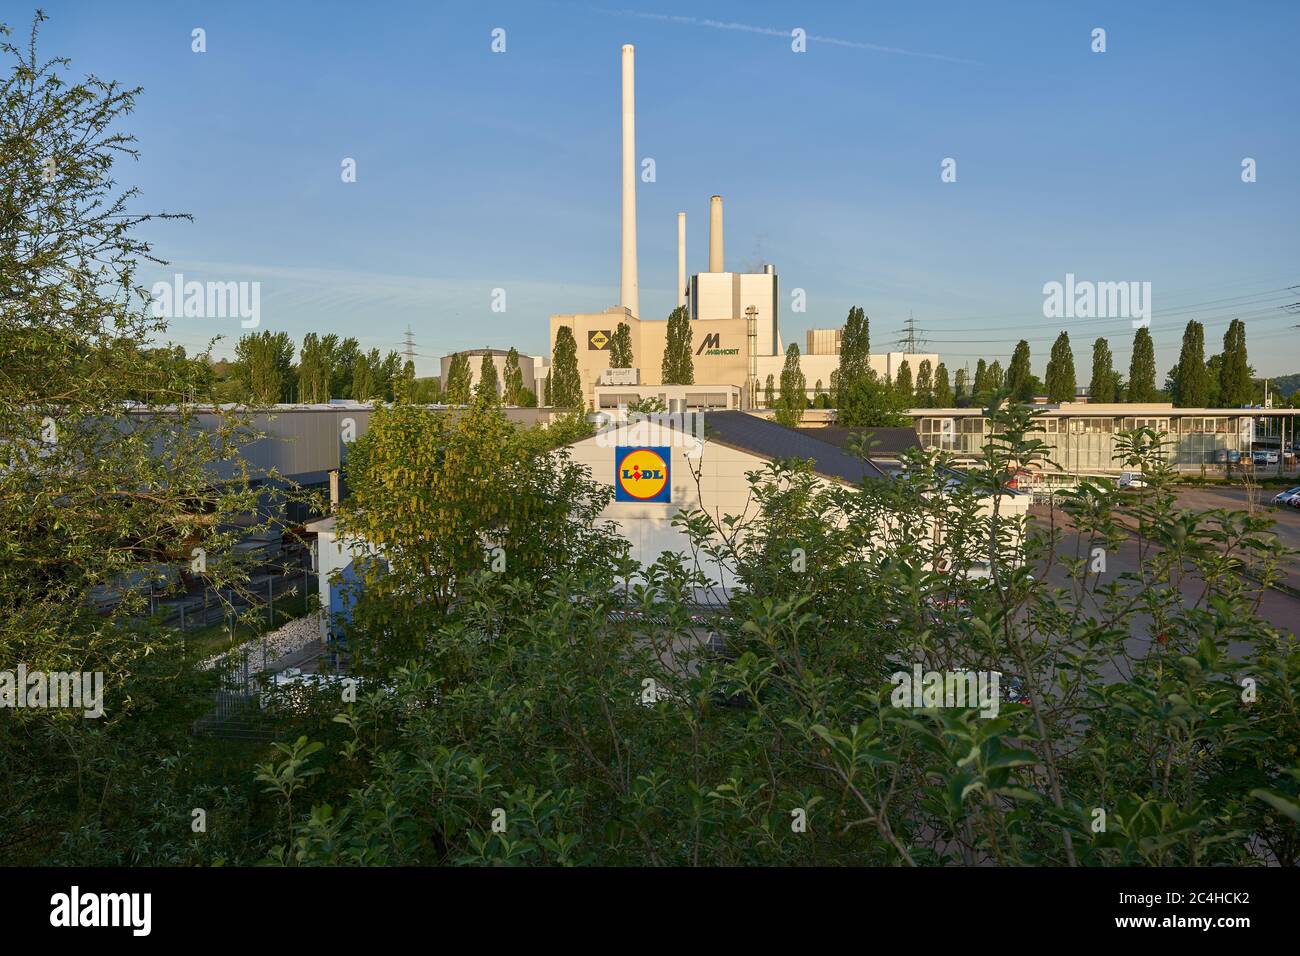 Altbach, Germany - May 08, 2020: Lidl is a discount company based in Neckarsulm in Baden-Wuerttemberg. Stock Photo